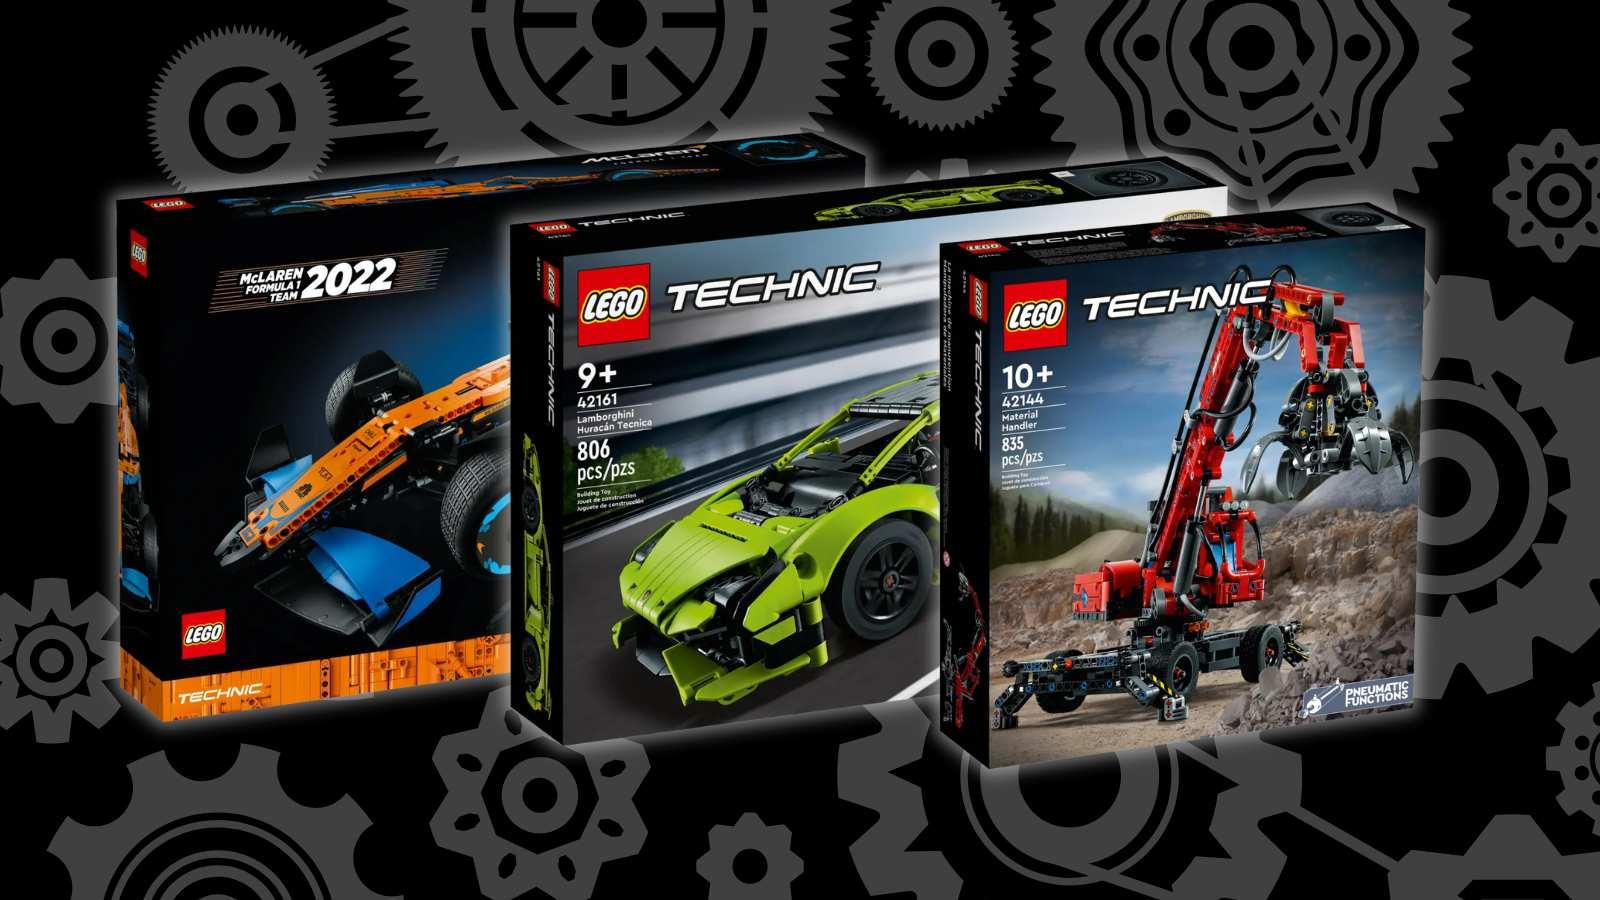 Three LEGO Technic sets on a black background with machine graphics